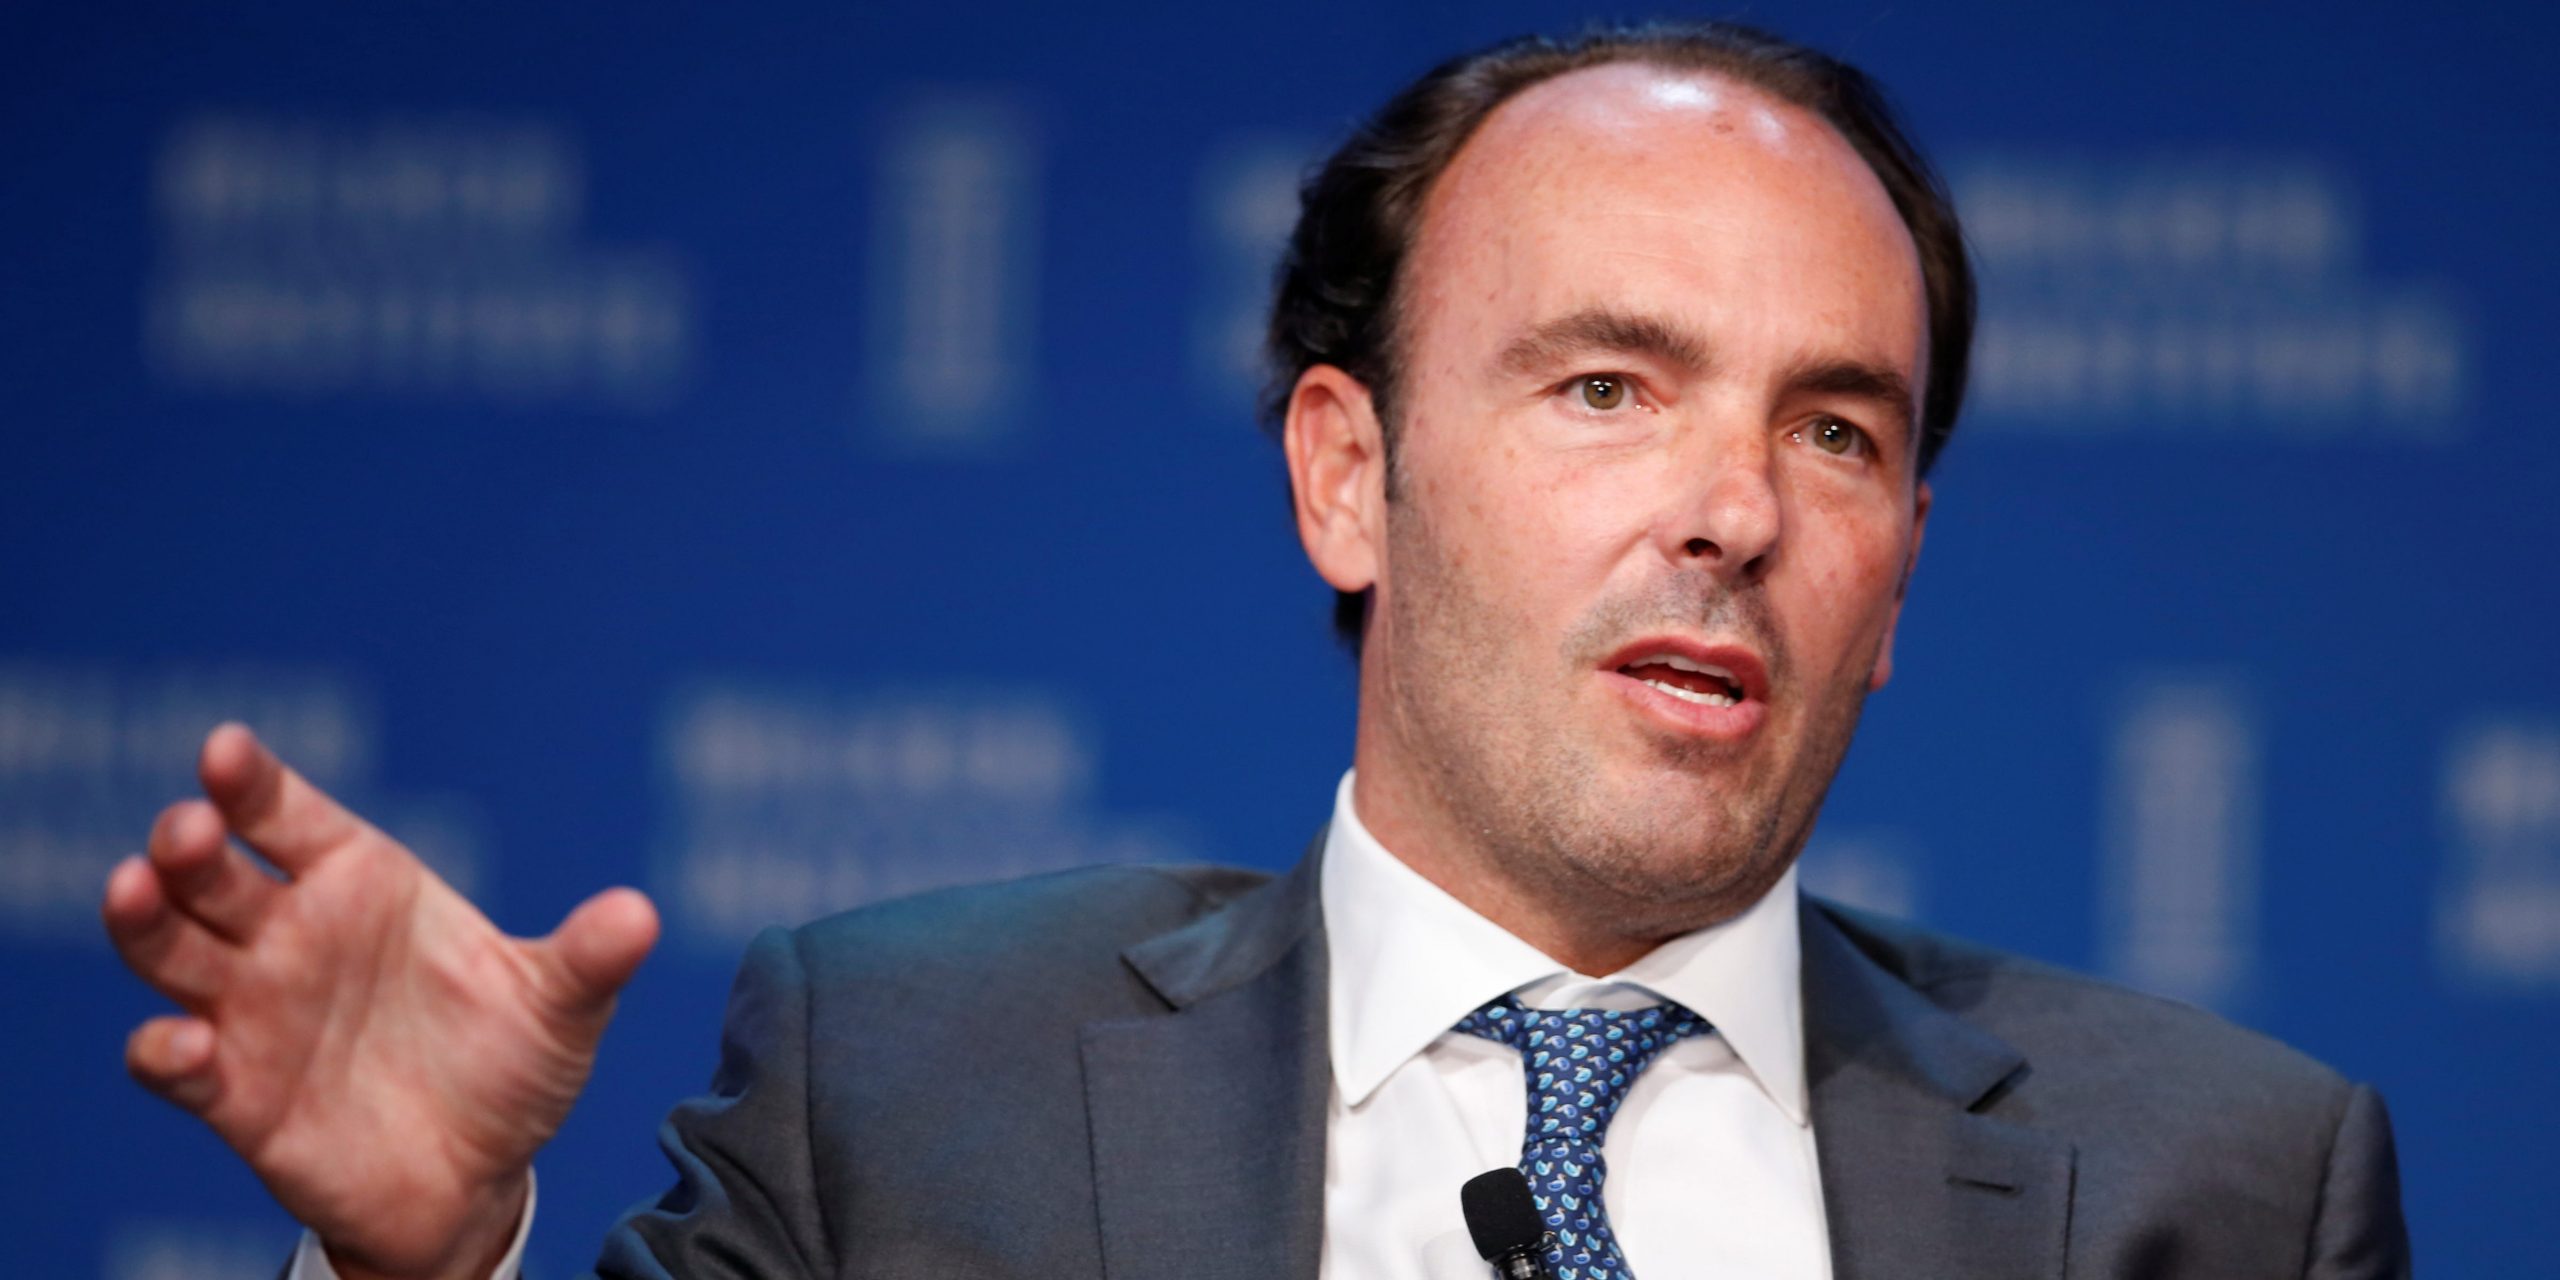 Kyle Bass of Hayman Capital speaking at a 2016 appearance.